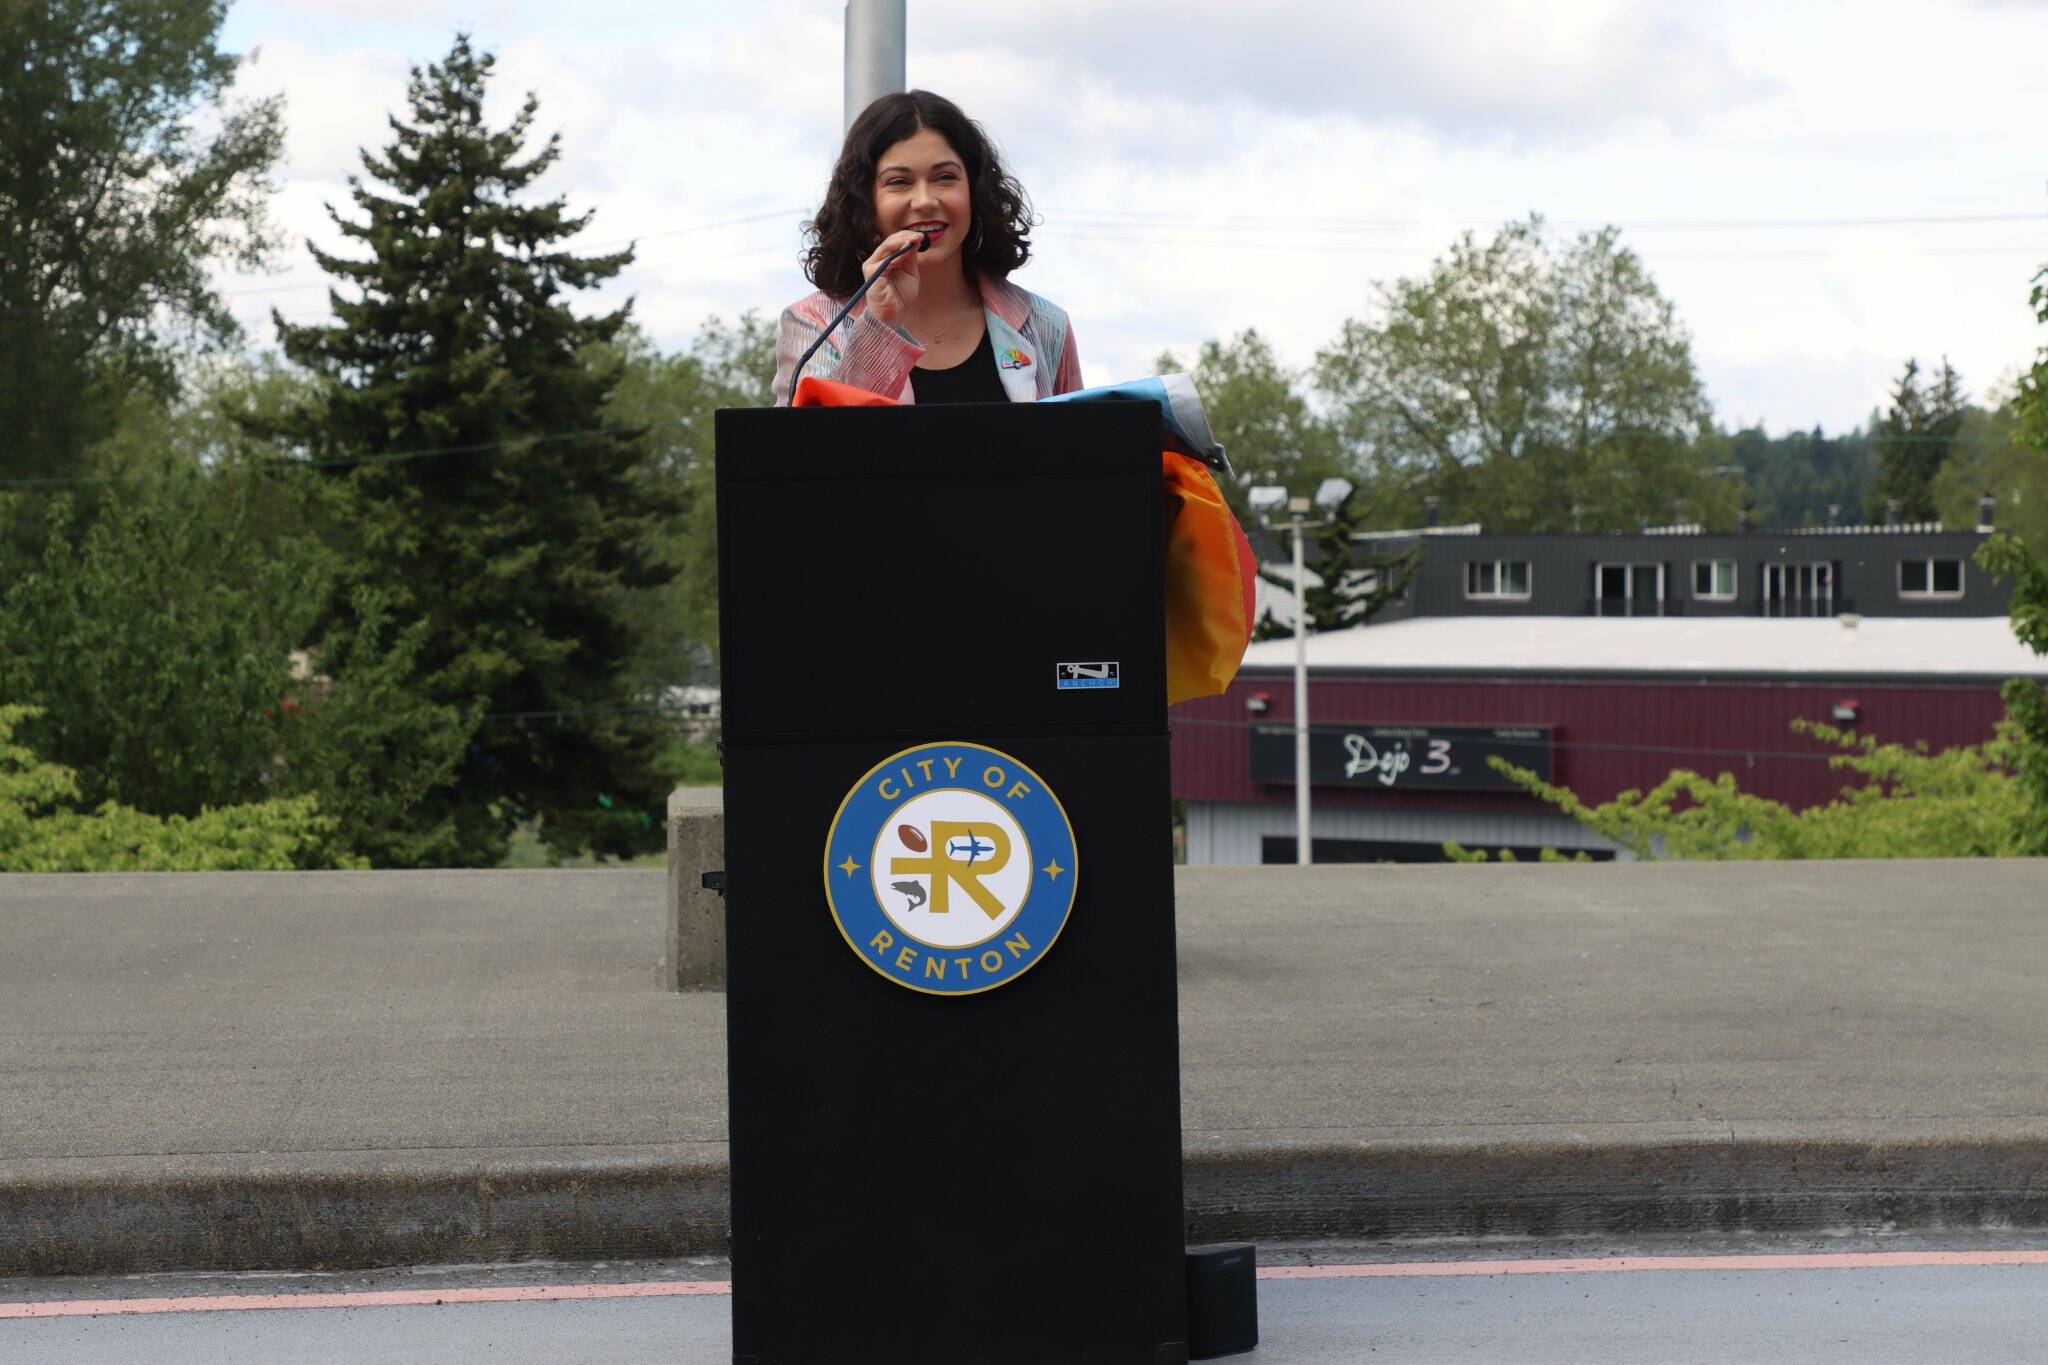 Renton City Councilmember Carmen Rivera, the city’s first openly queer council member, gives a speech for LGBTQIA+ Pride Month. Photo courtesy of the City of Renton.